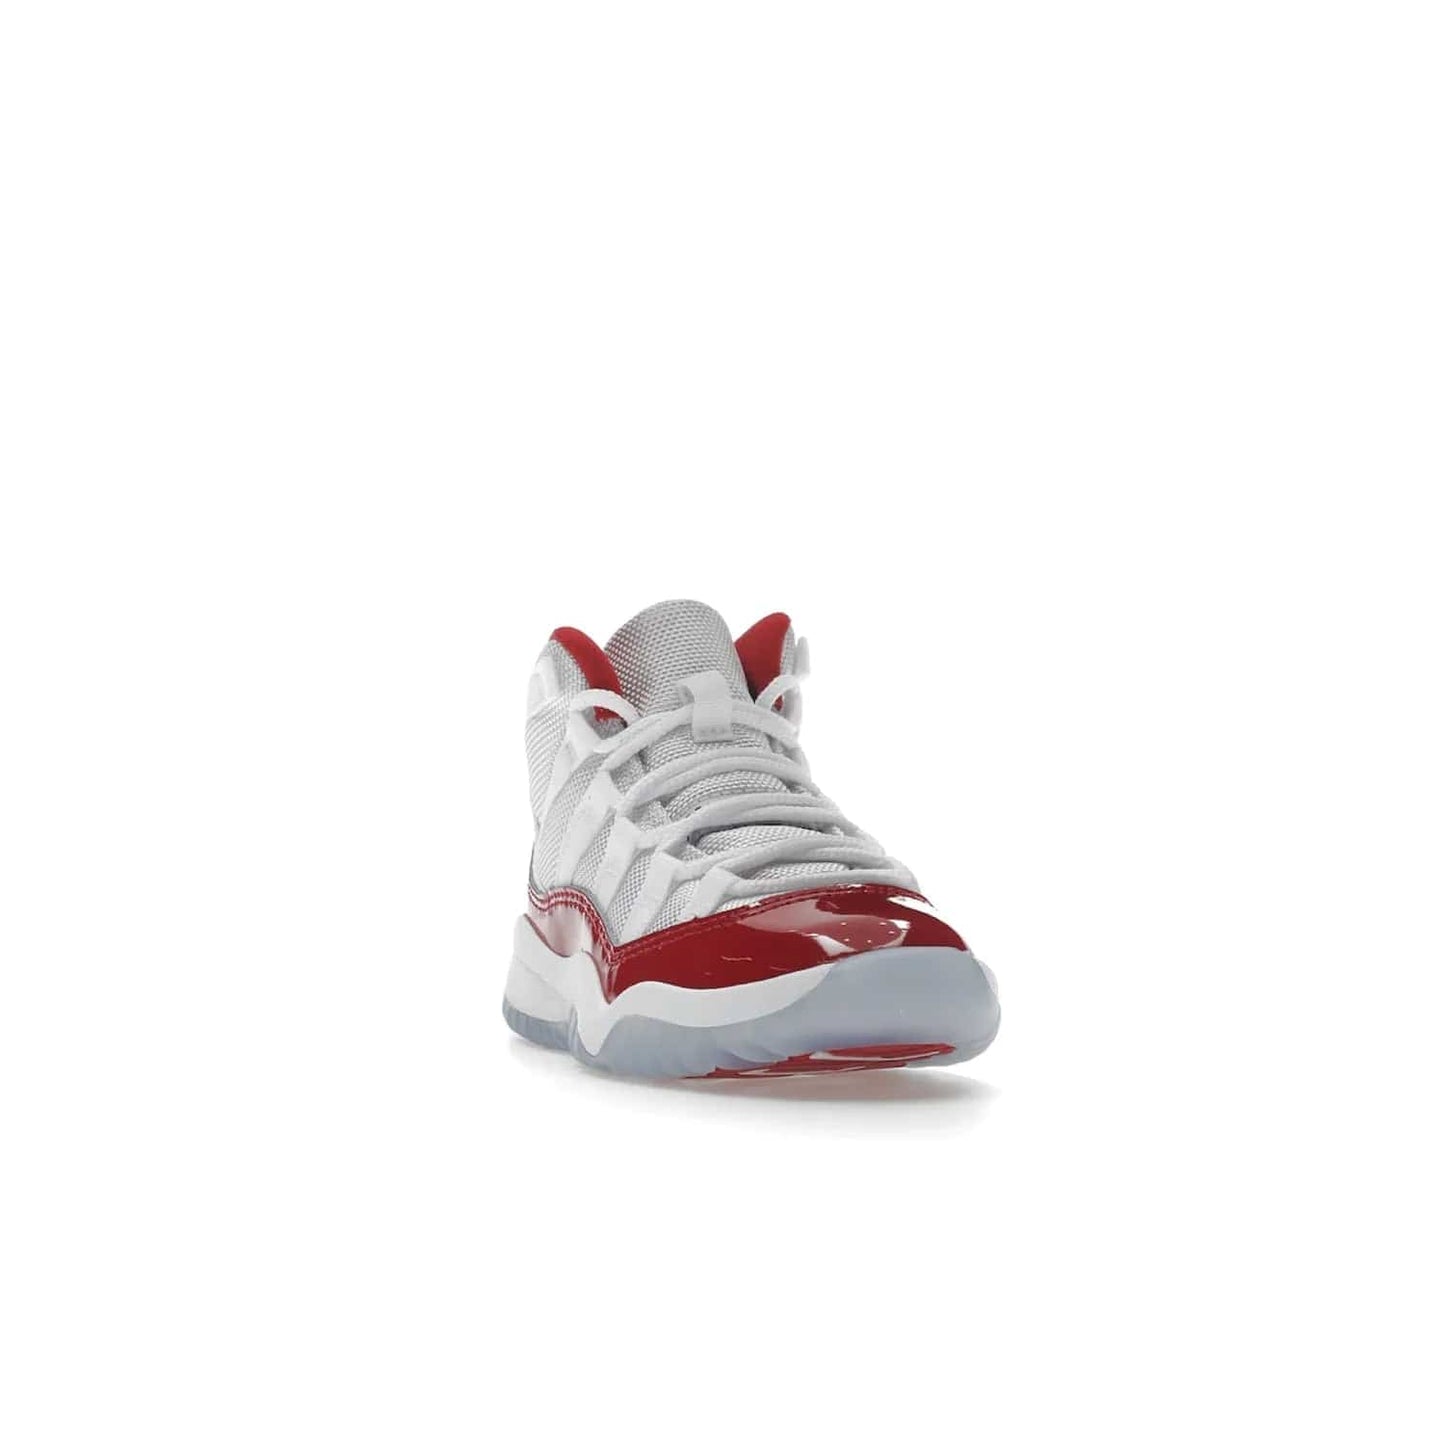 Jordan 11 Retro Cherry (2022) (PS) - Image 8 - Only at www.BallersClubKickz.com - An iconic silhouette with a timeless look, the Air Jordan 11 Retro Cherry 2022 PS features a crisp White, Varsity Red and Black colorway. The upper is made of ballistic mesh, a red patent leather mudguard, '23' branding and white Phylon midsole. Get optimal cushioning and comfort on December 10th, 2022. Don't miss out.